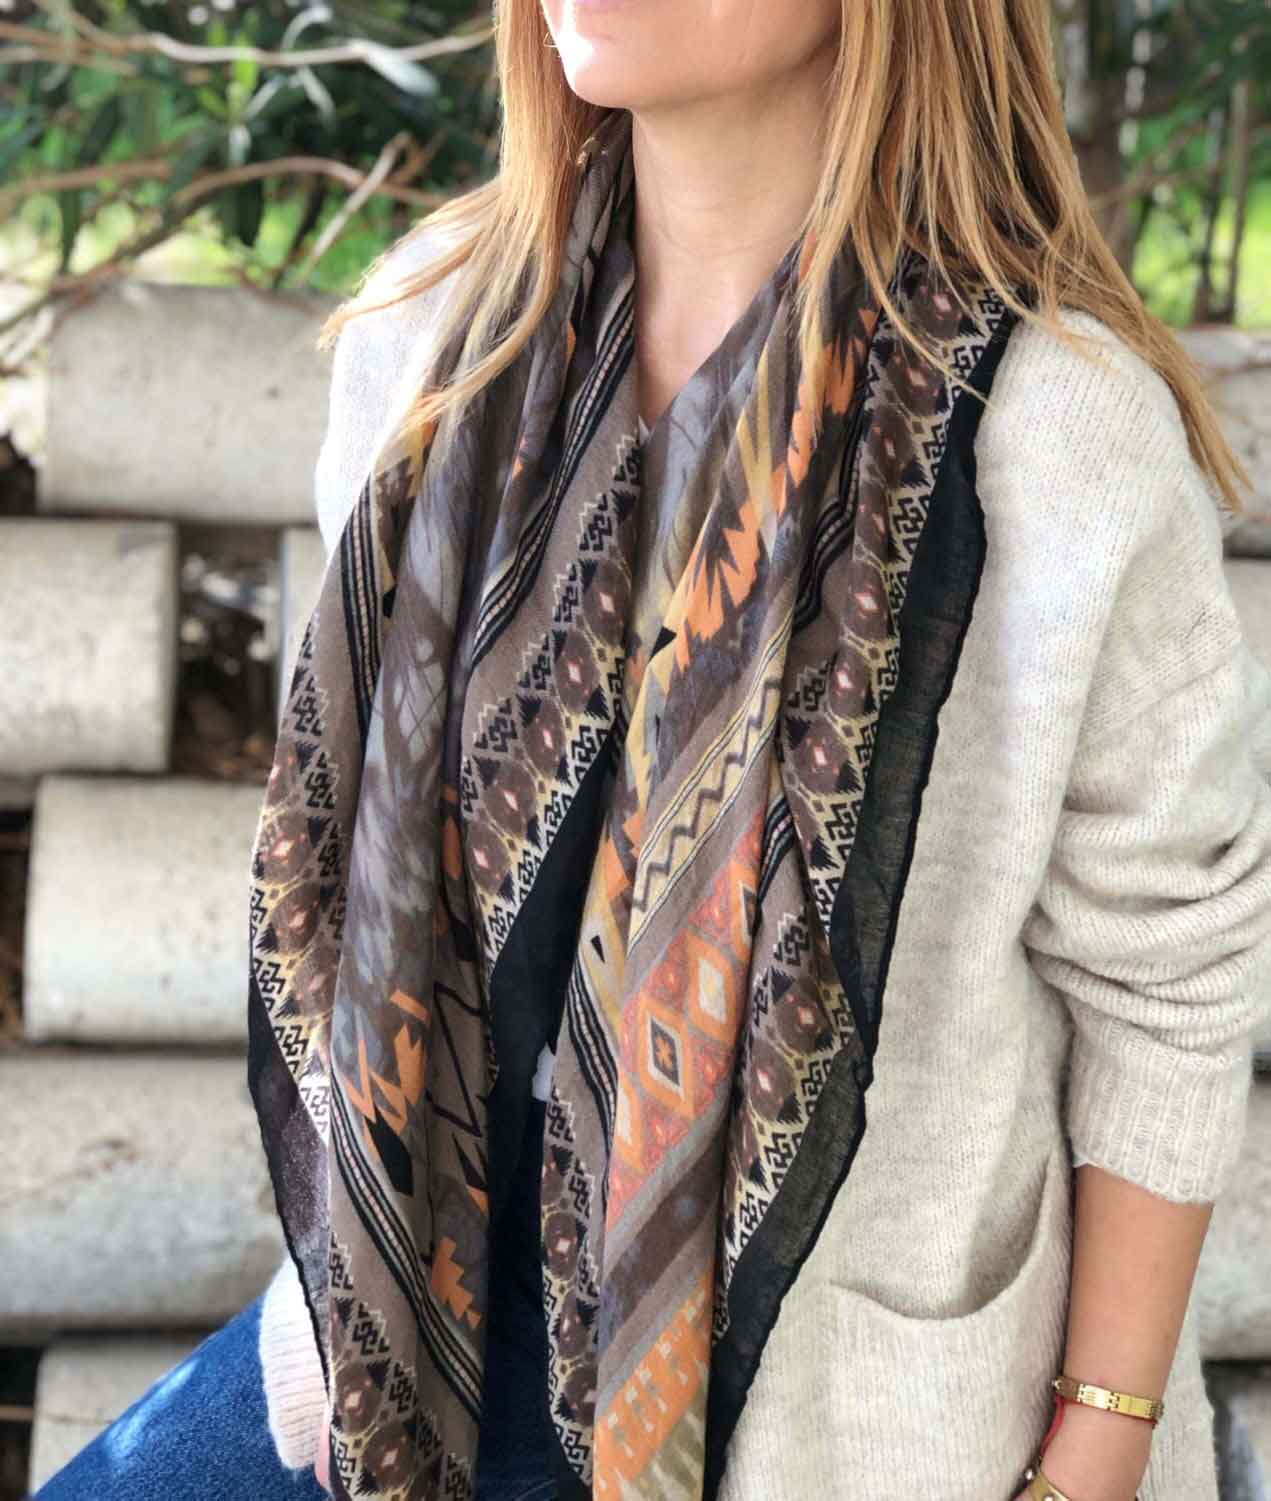 Large Cotton Square Scarf, Spring Autumn Scarf, Gift for Her, Black Khaki Green Yellow Ethnic Pattern Scarf with Black Tassel